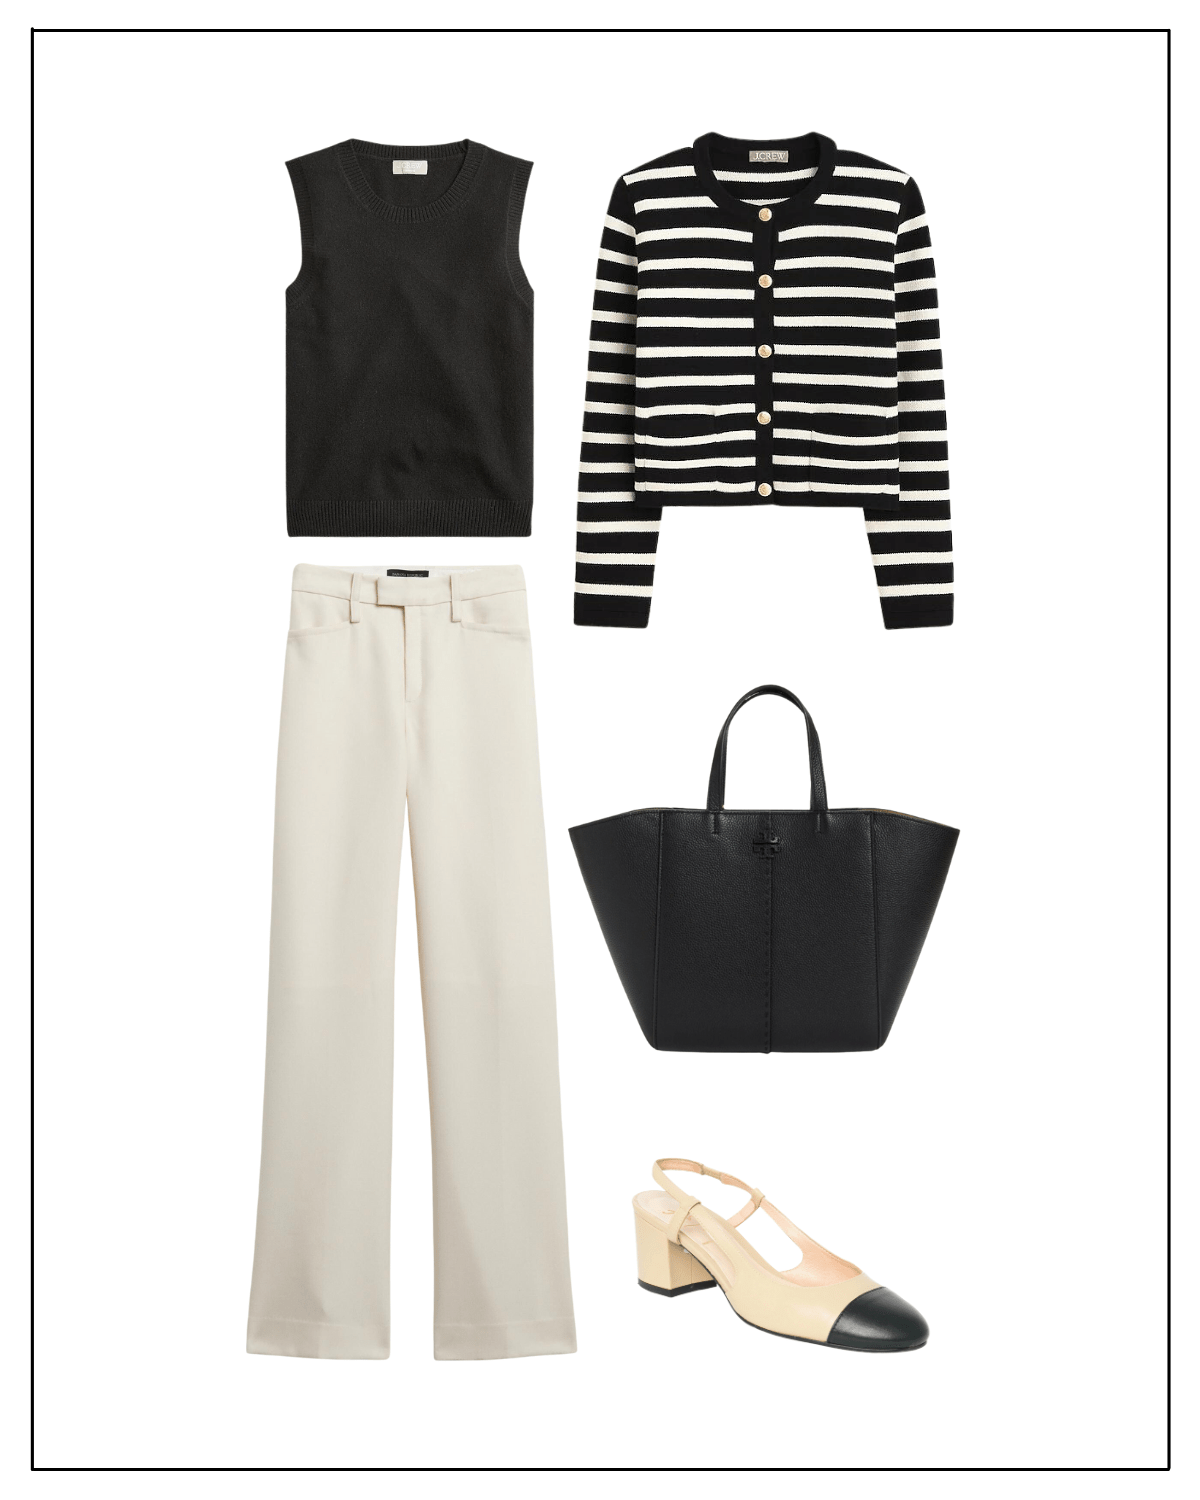 3 Workwear Outfit Ideas